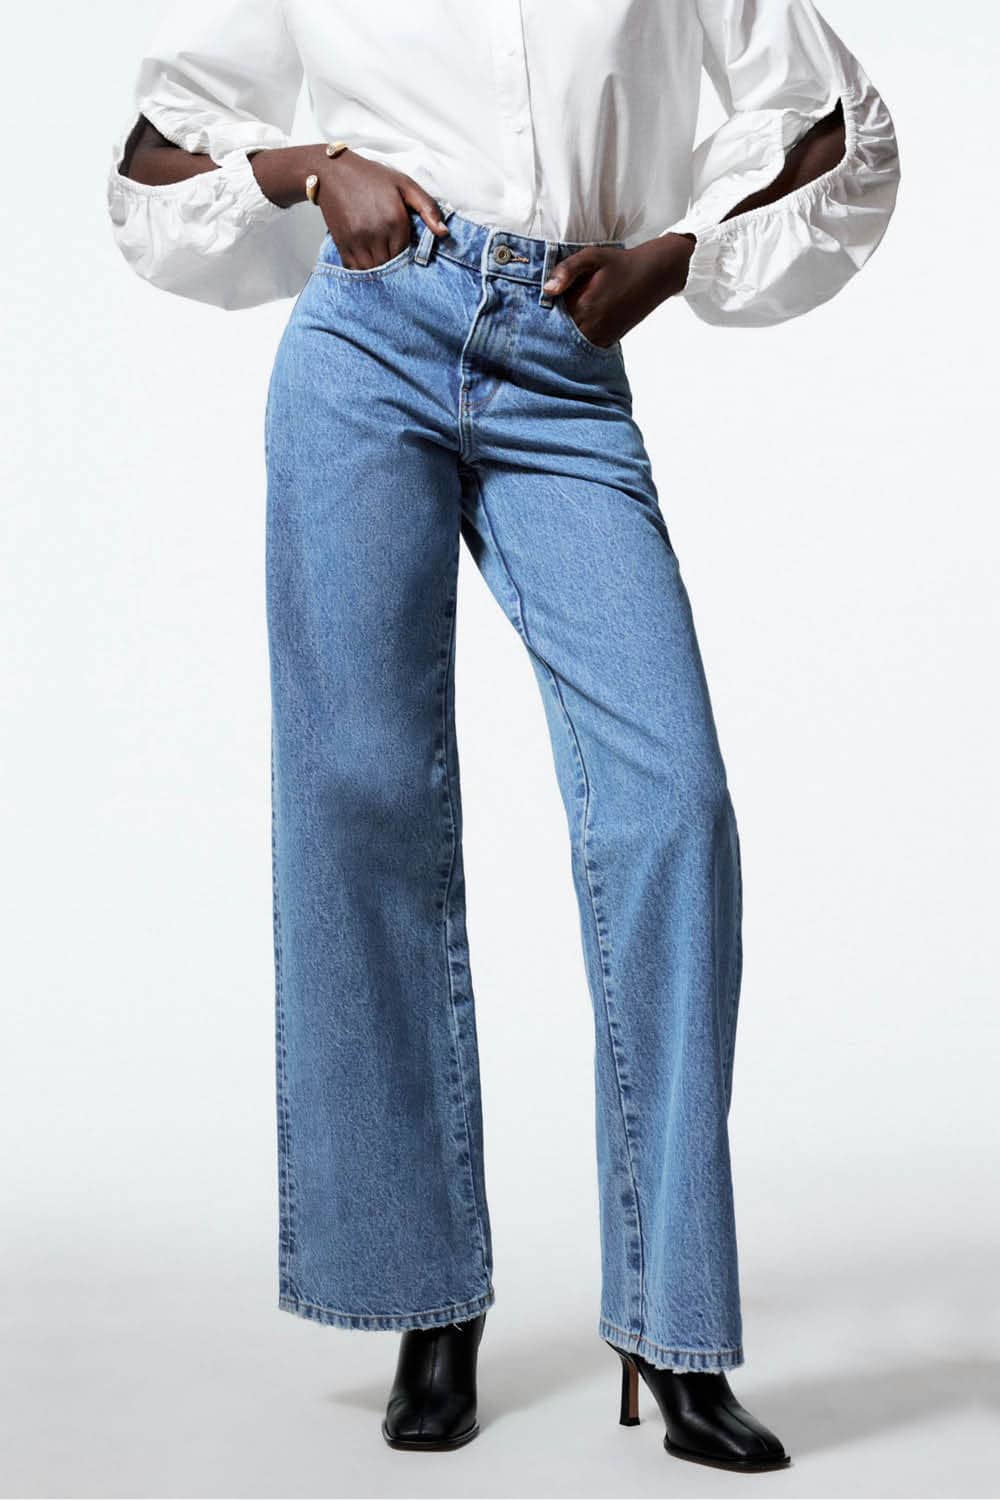 Wide Leg Jeans Are Trending